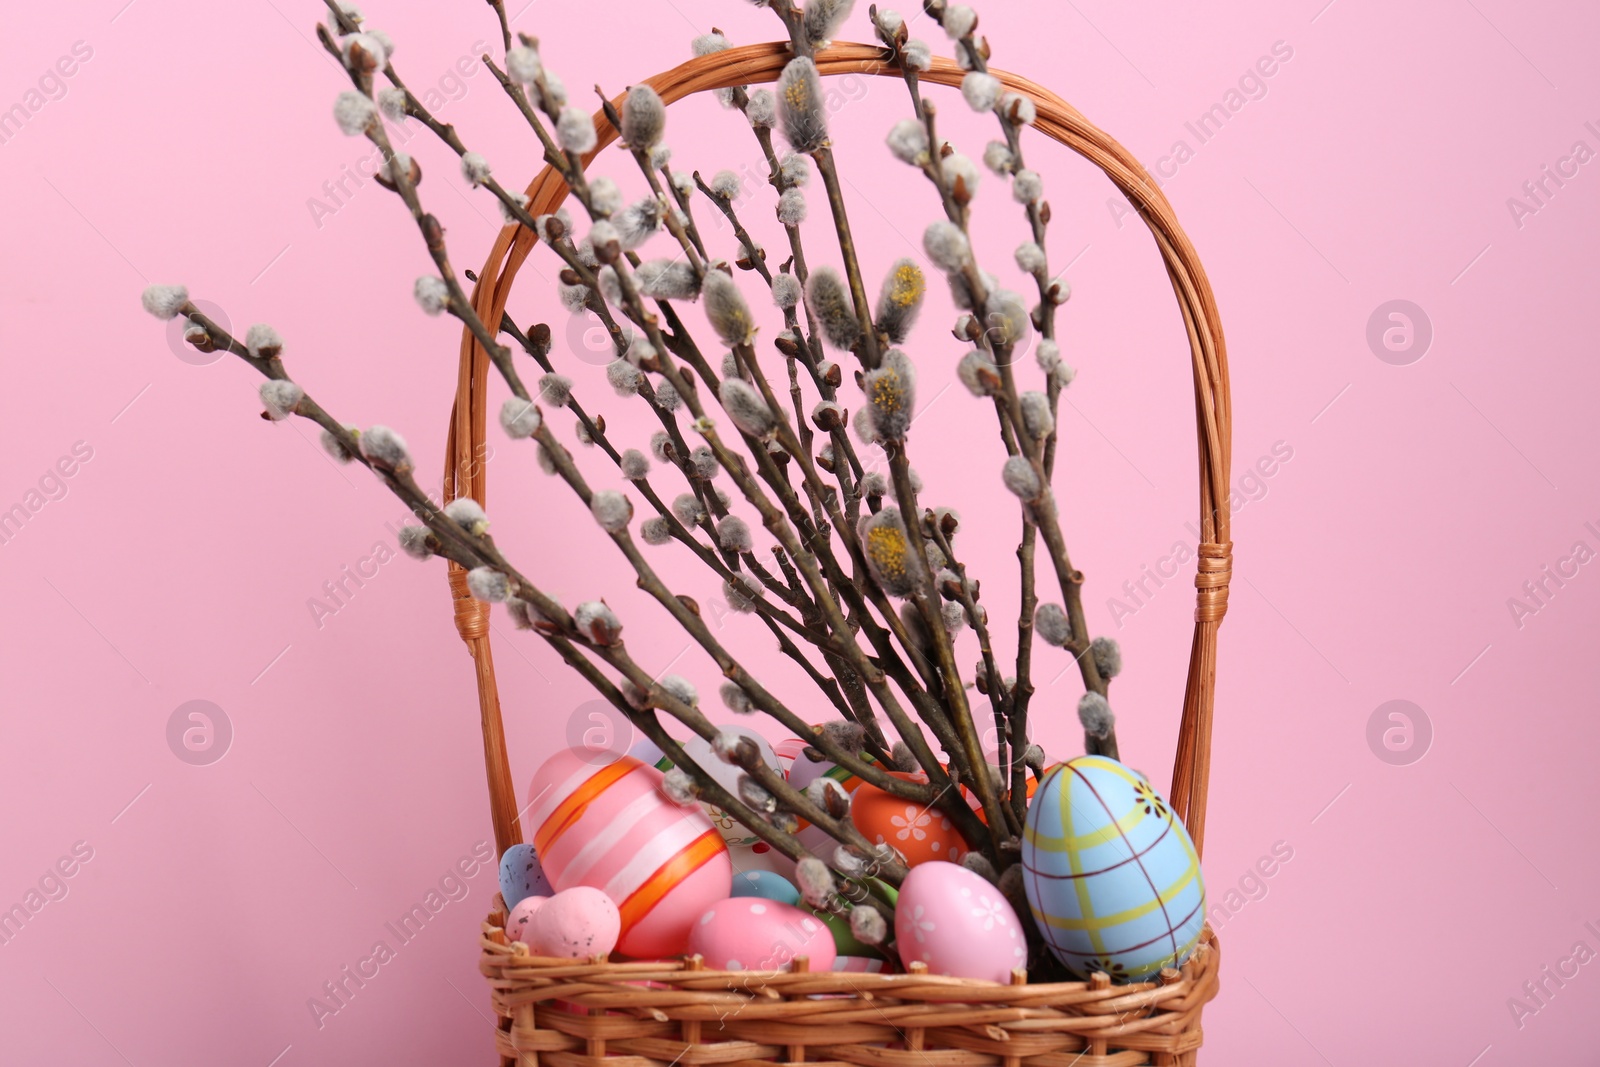 Photo of Wicker basket with beautiful willow branches and painted eggs on pink background. Easter decor